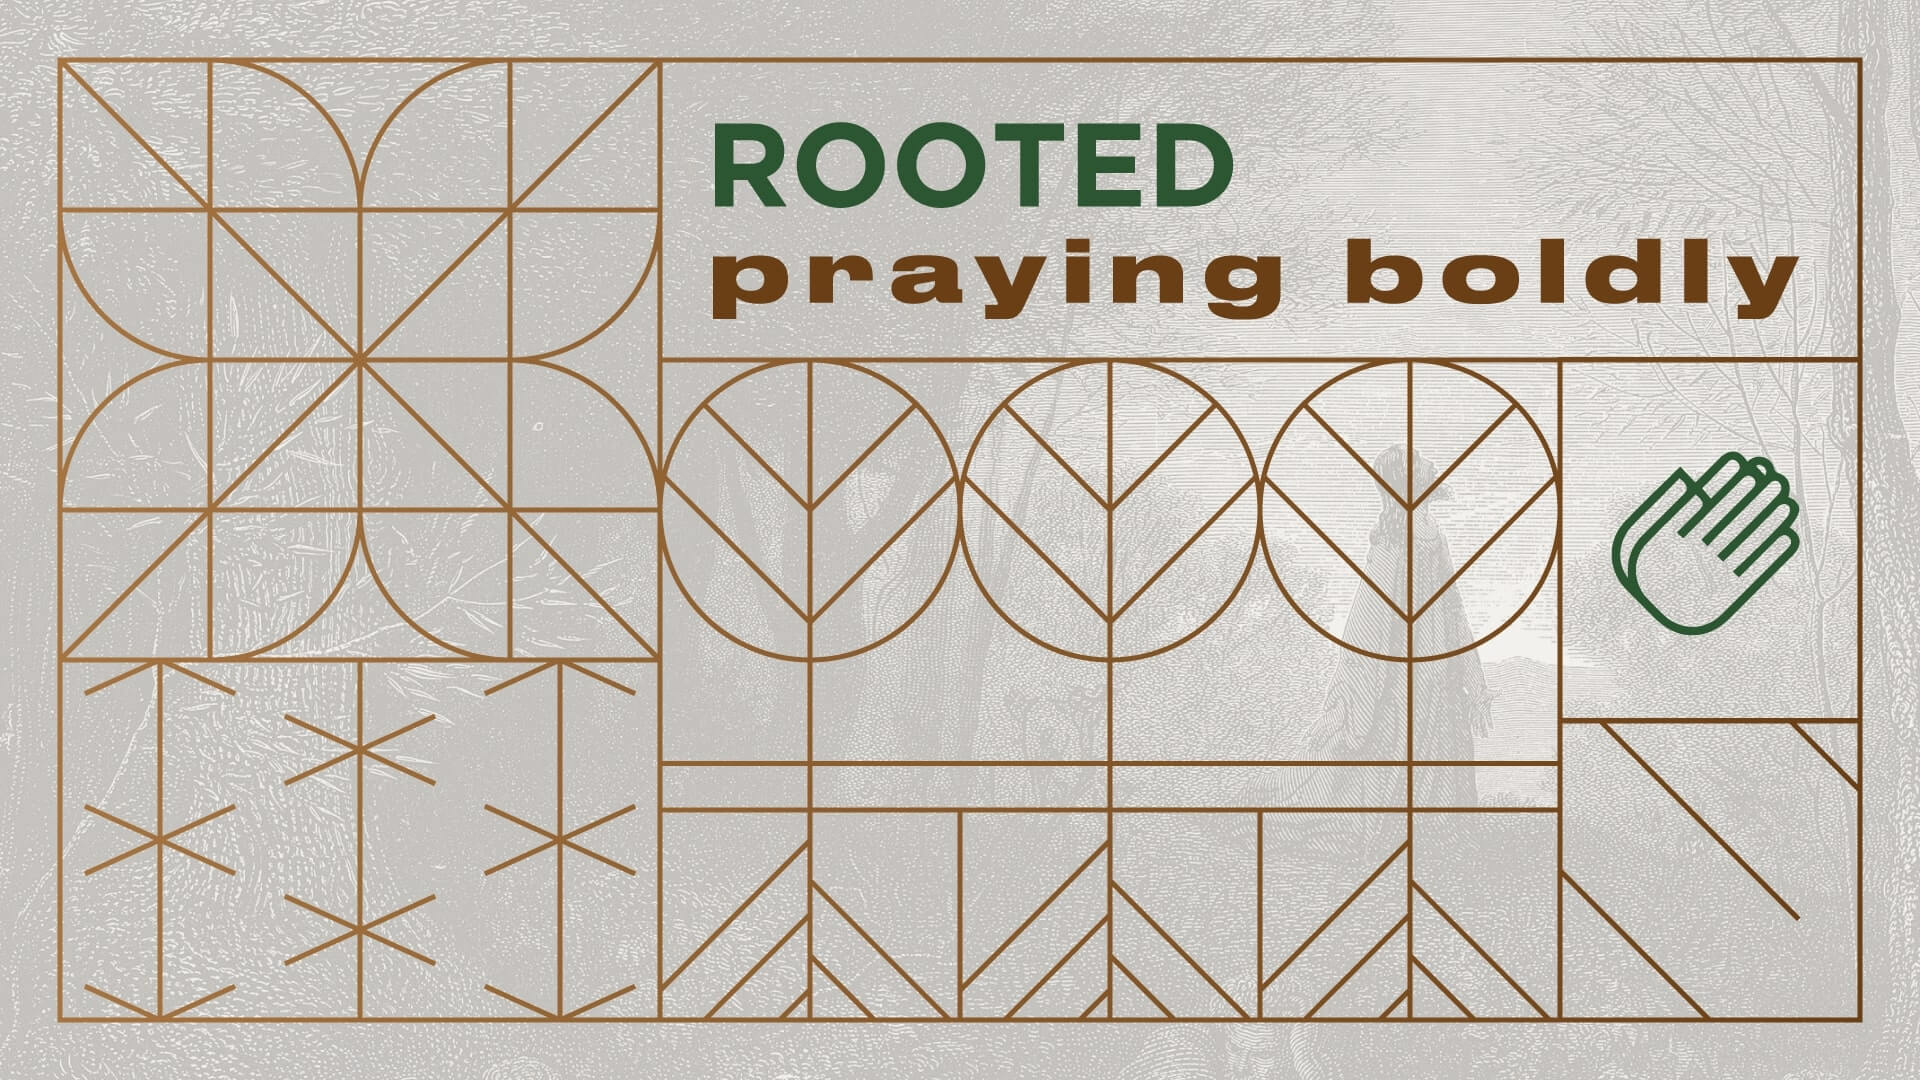 Rooted: Bold Devotion